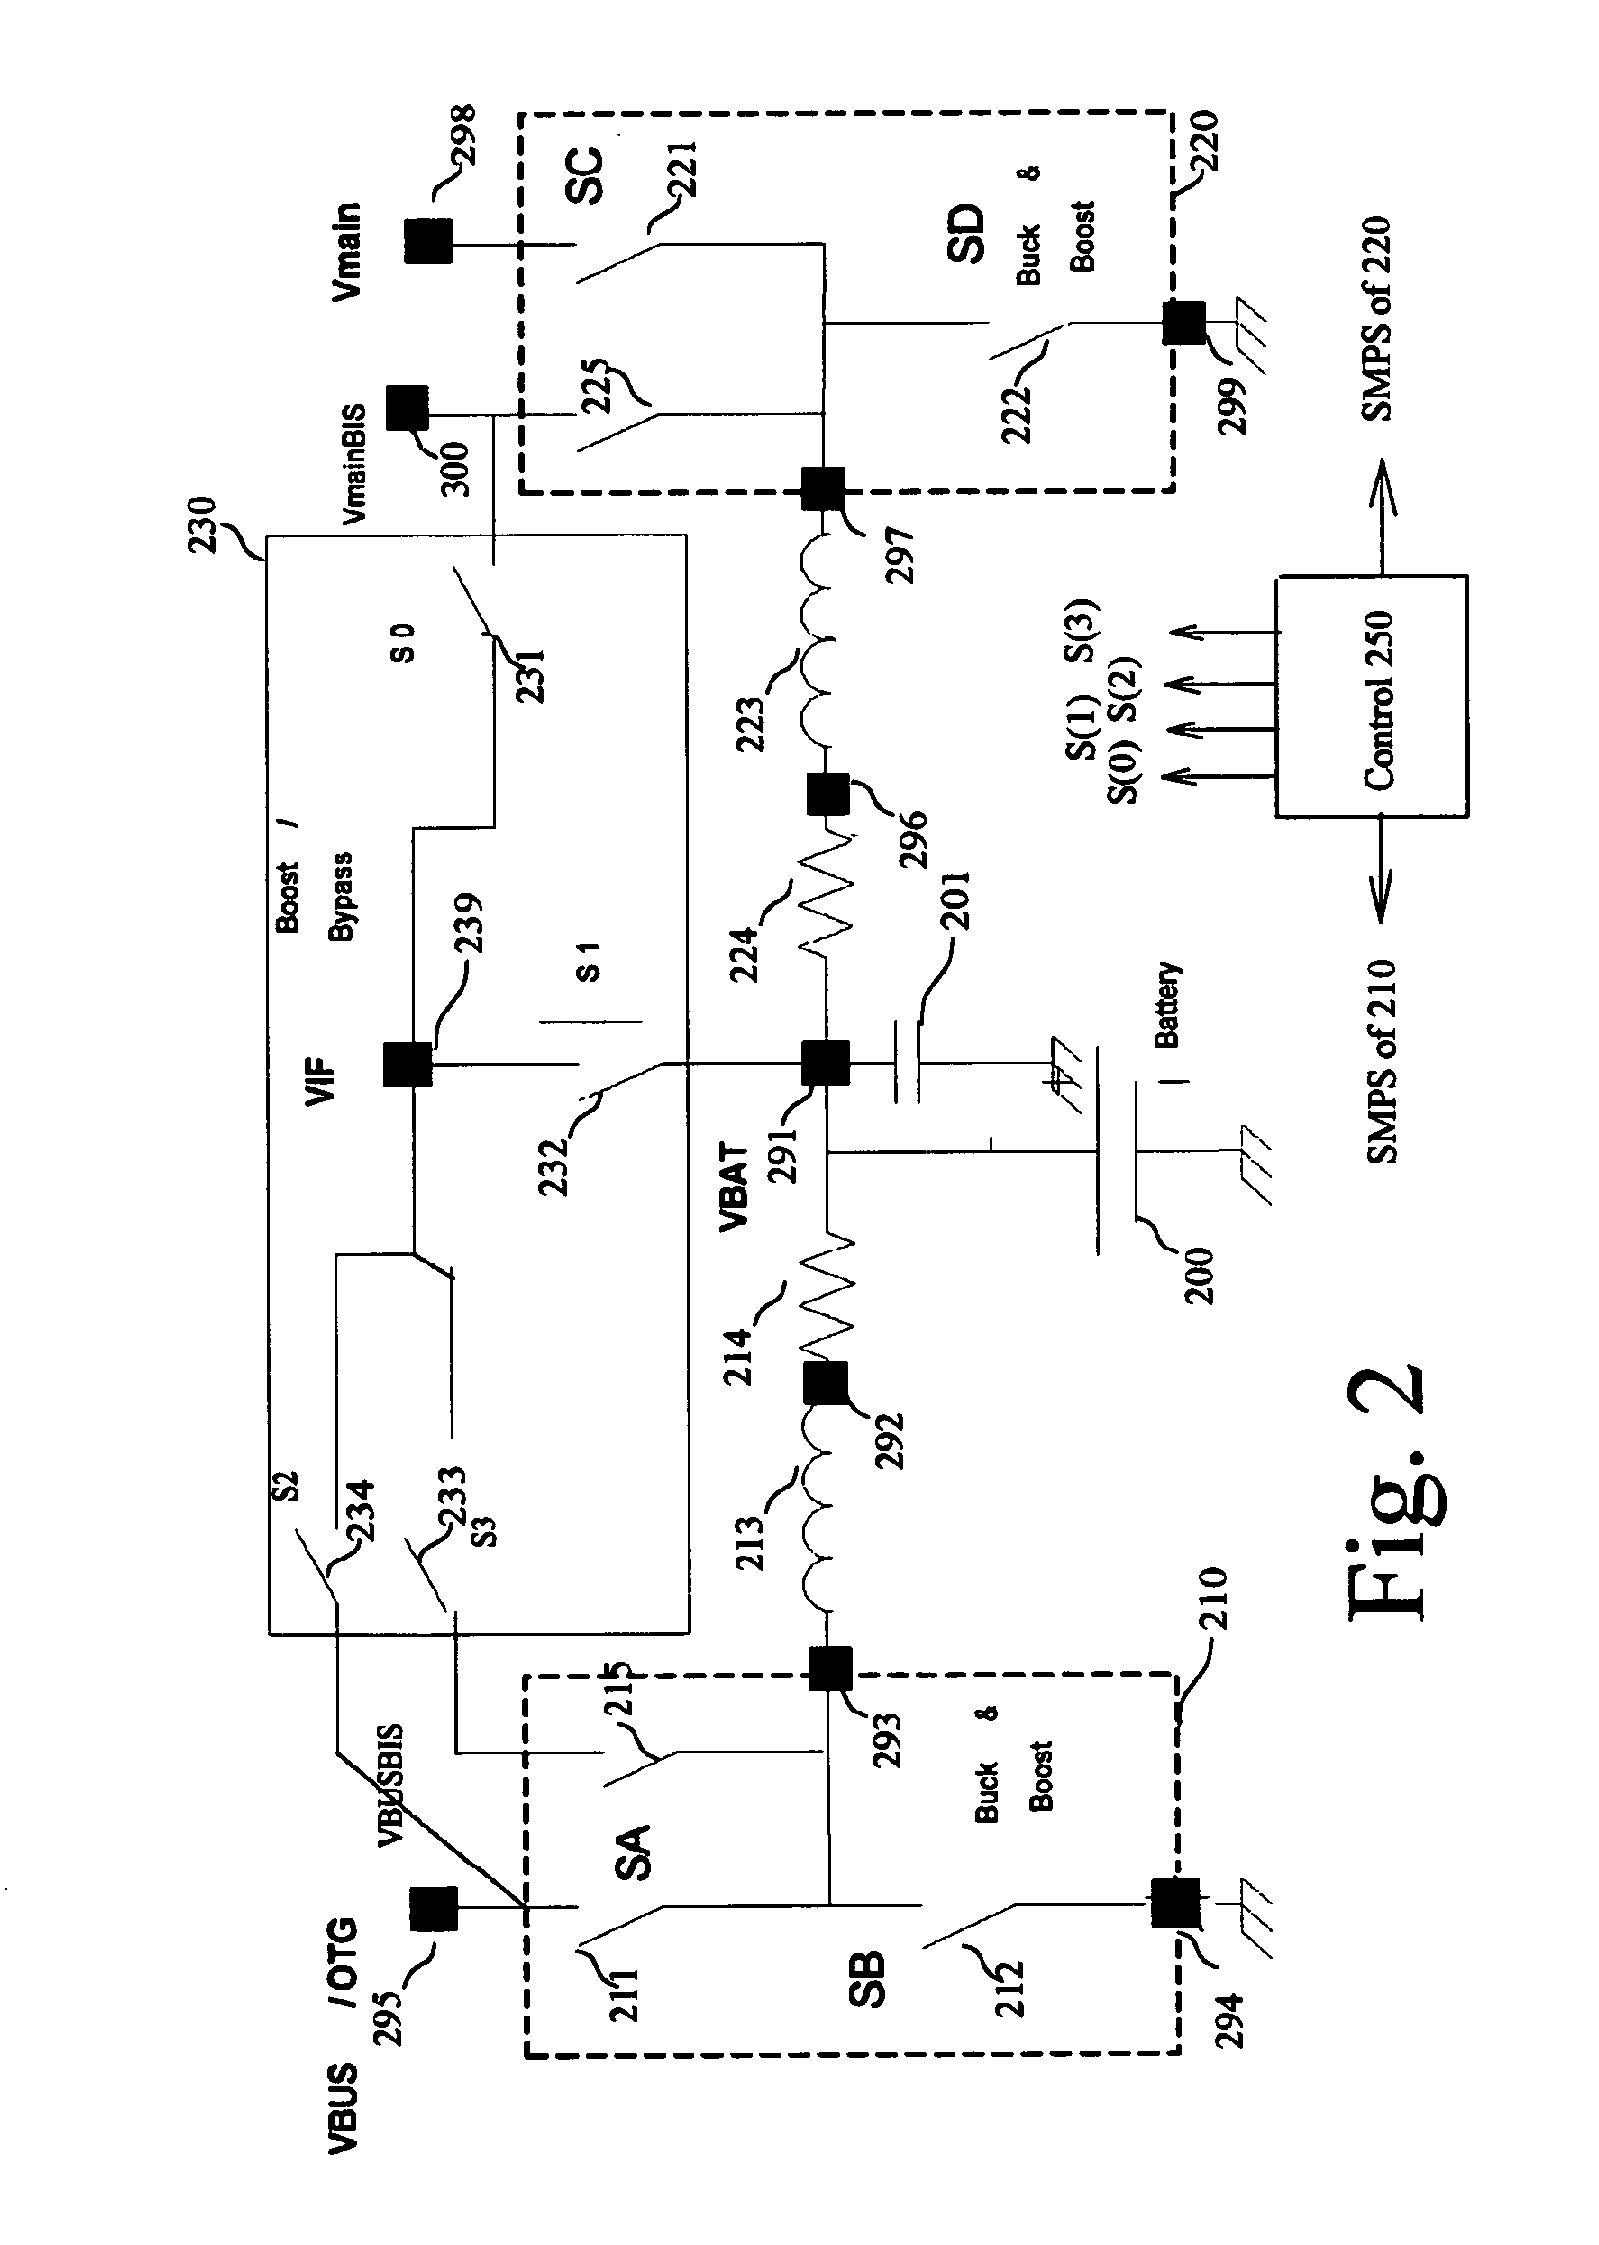 Power Management Circuit for a Portable Electronic Device Including USB Functionality and Method for Doing the Same